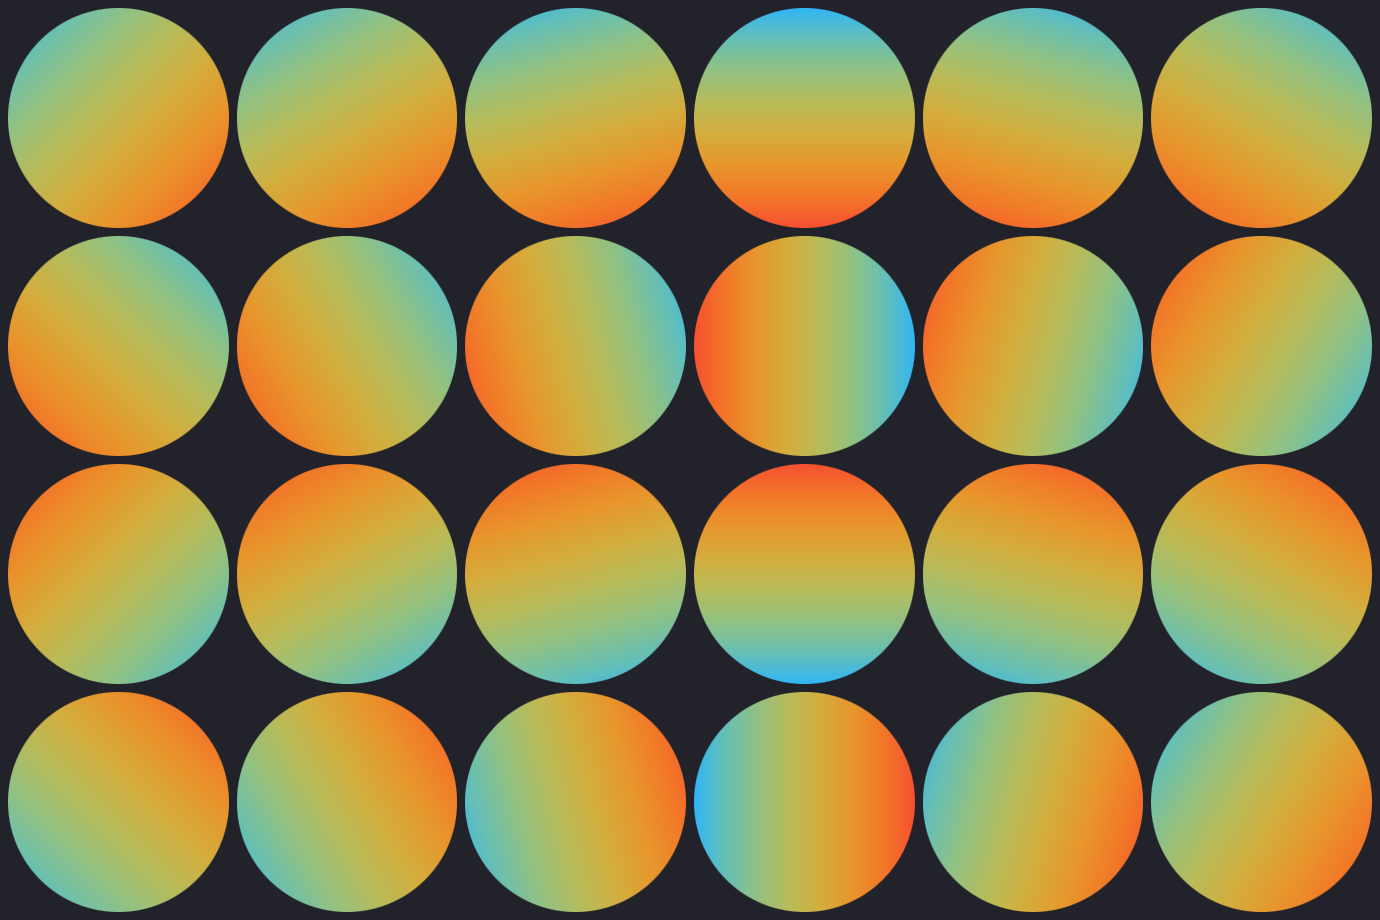 24 circles with a gradient fill in a six by four grid